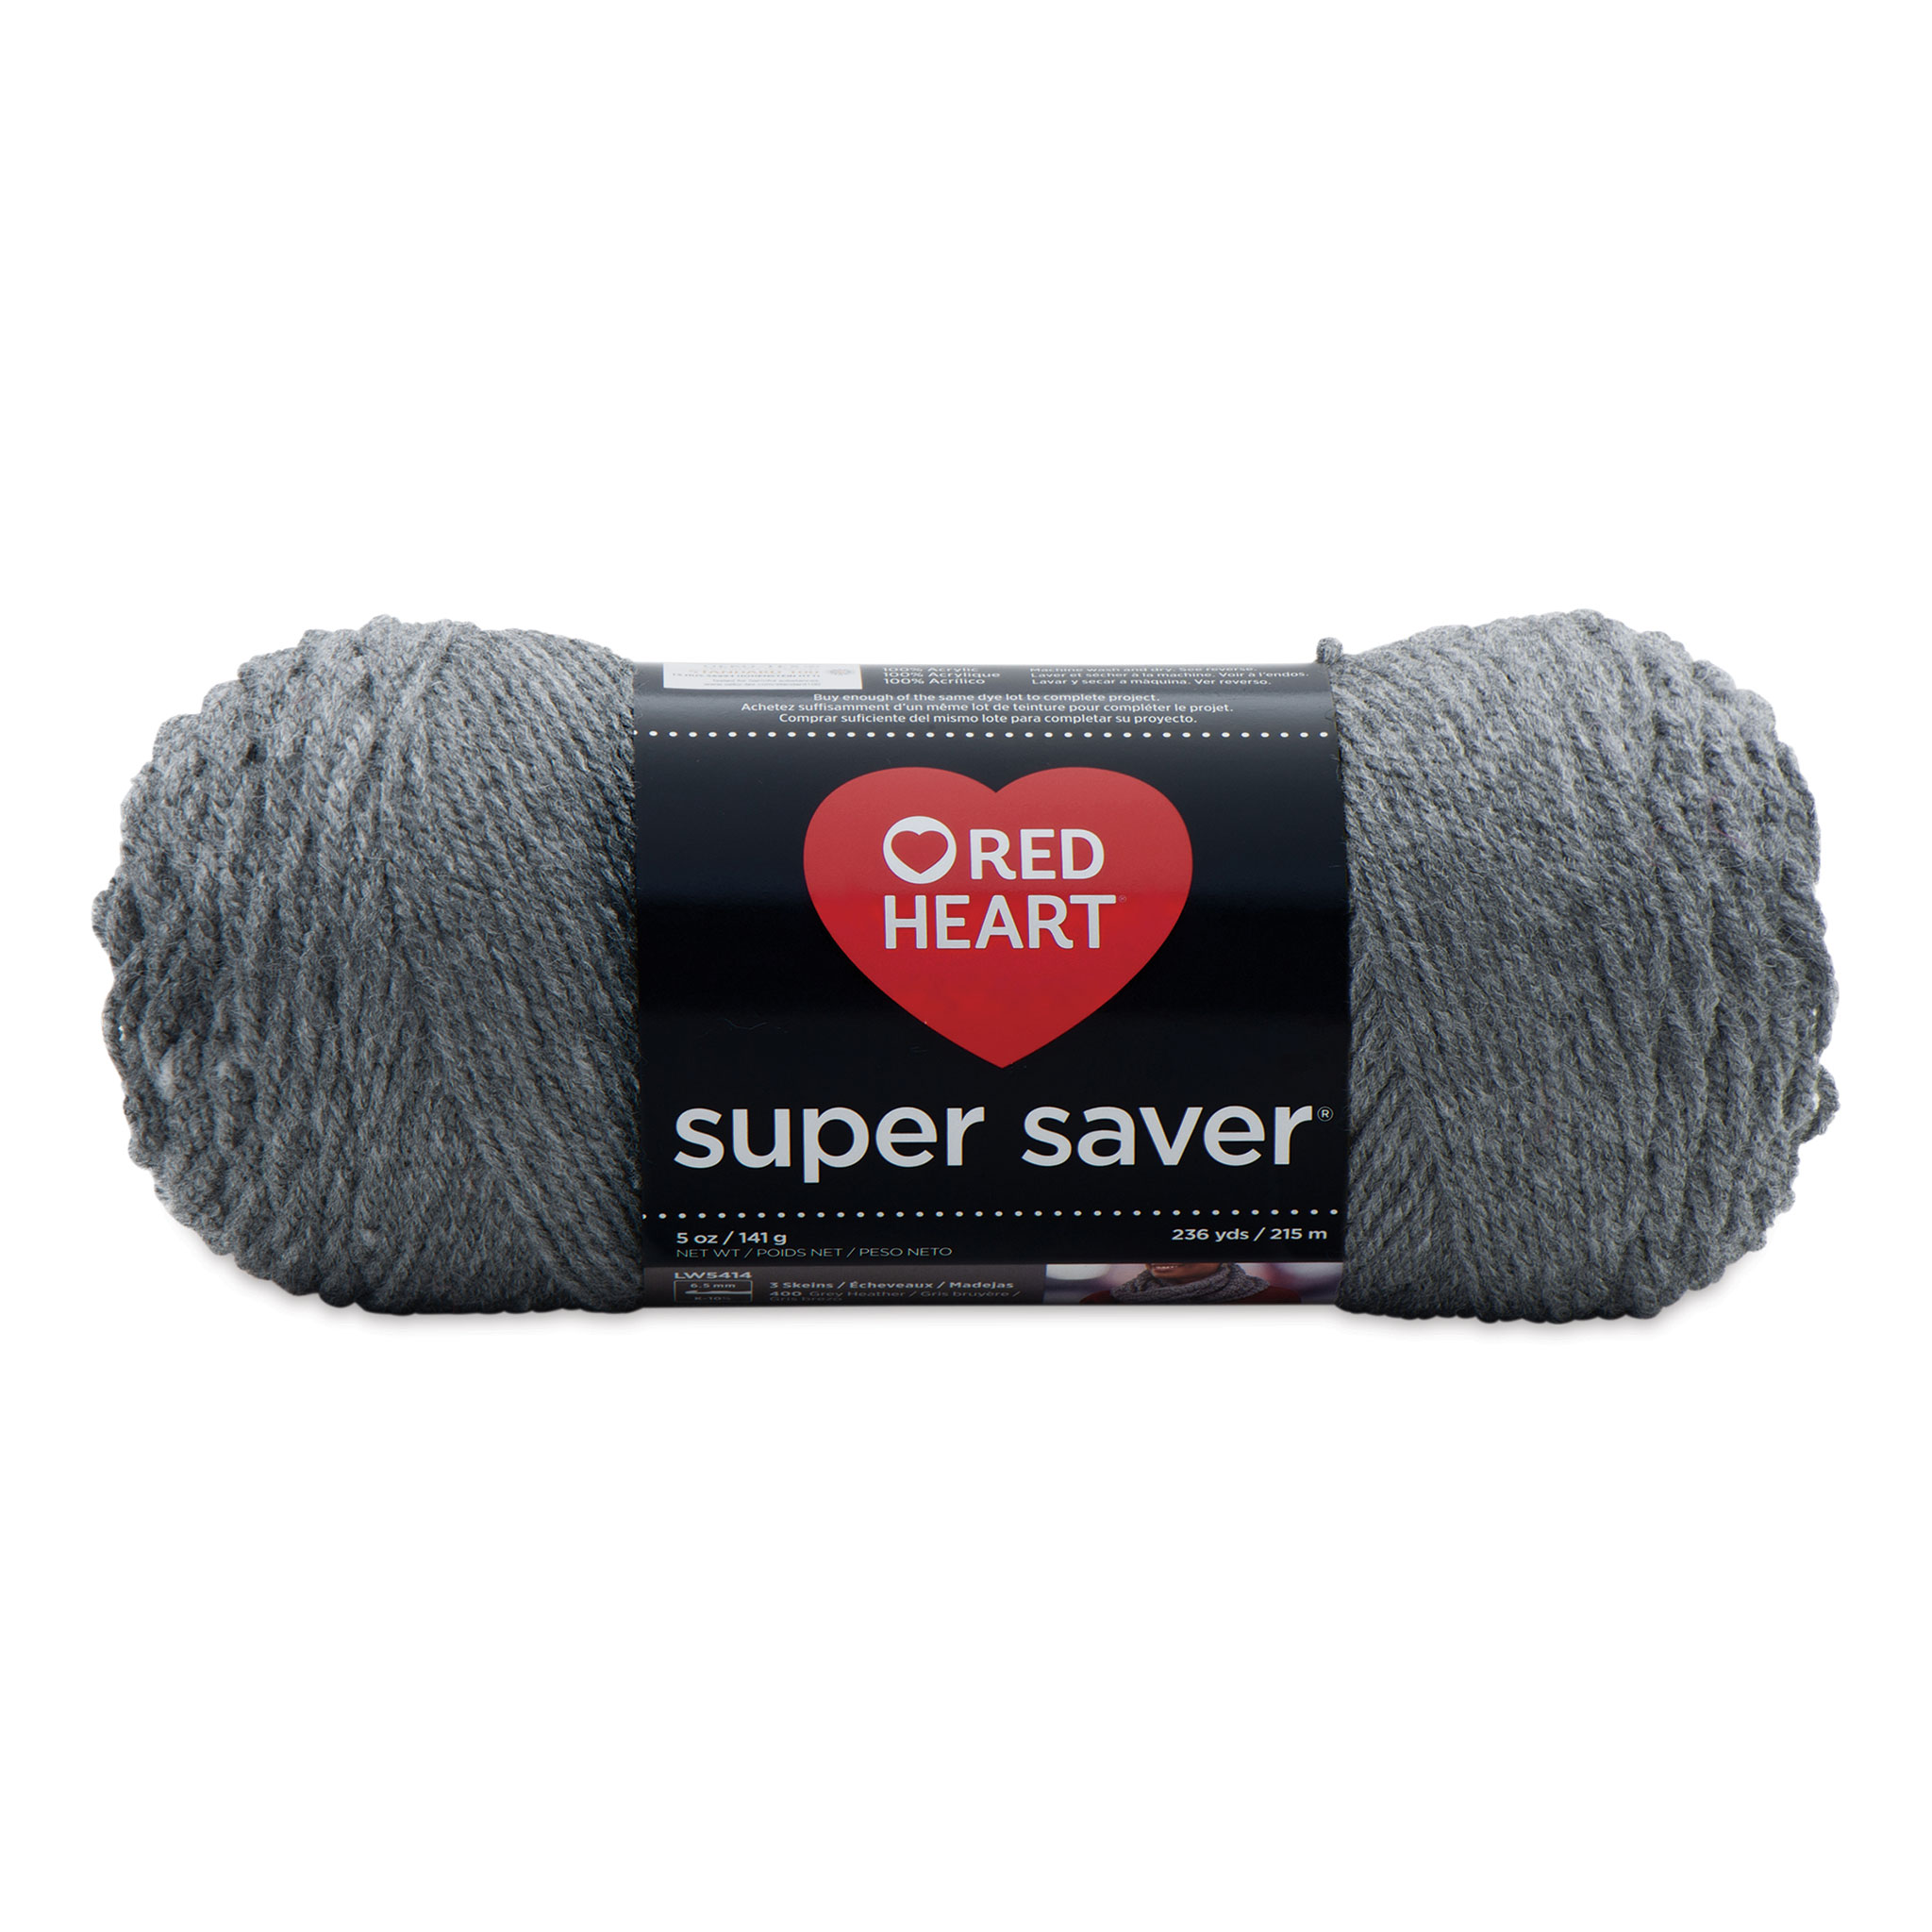 Red Heart Super Saver Yarn-Dusty Gray, 1 count - City Market